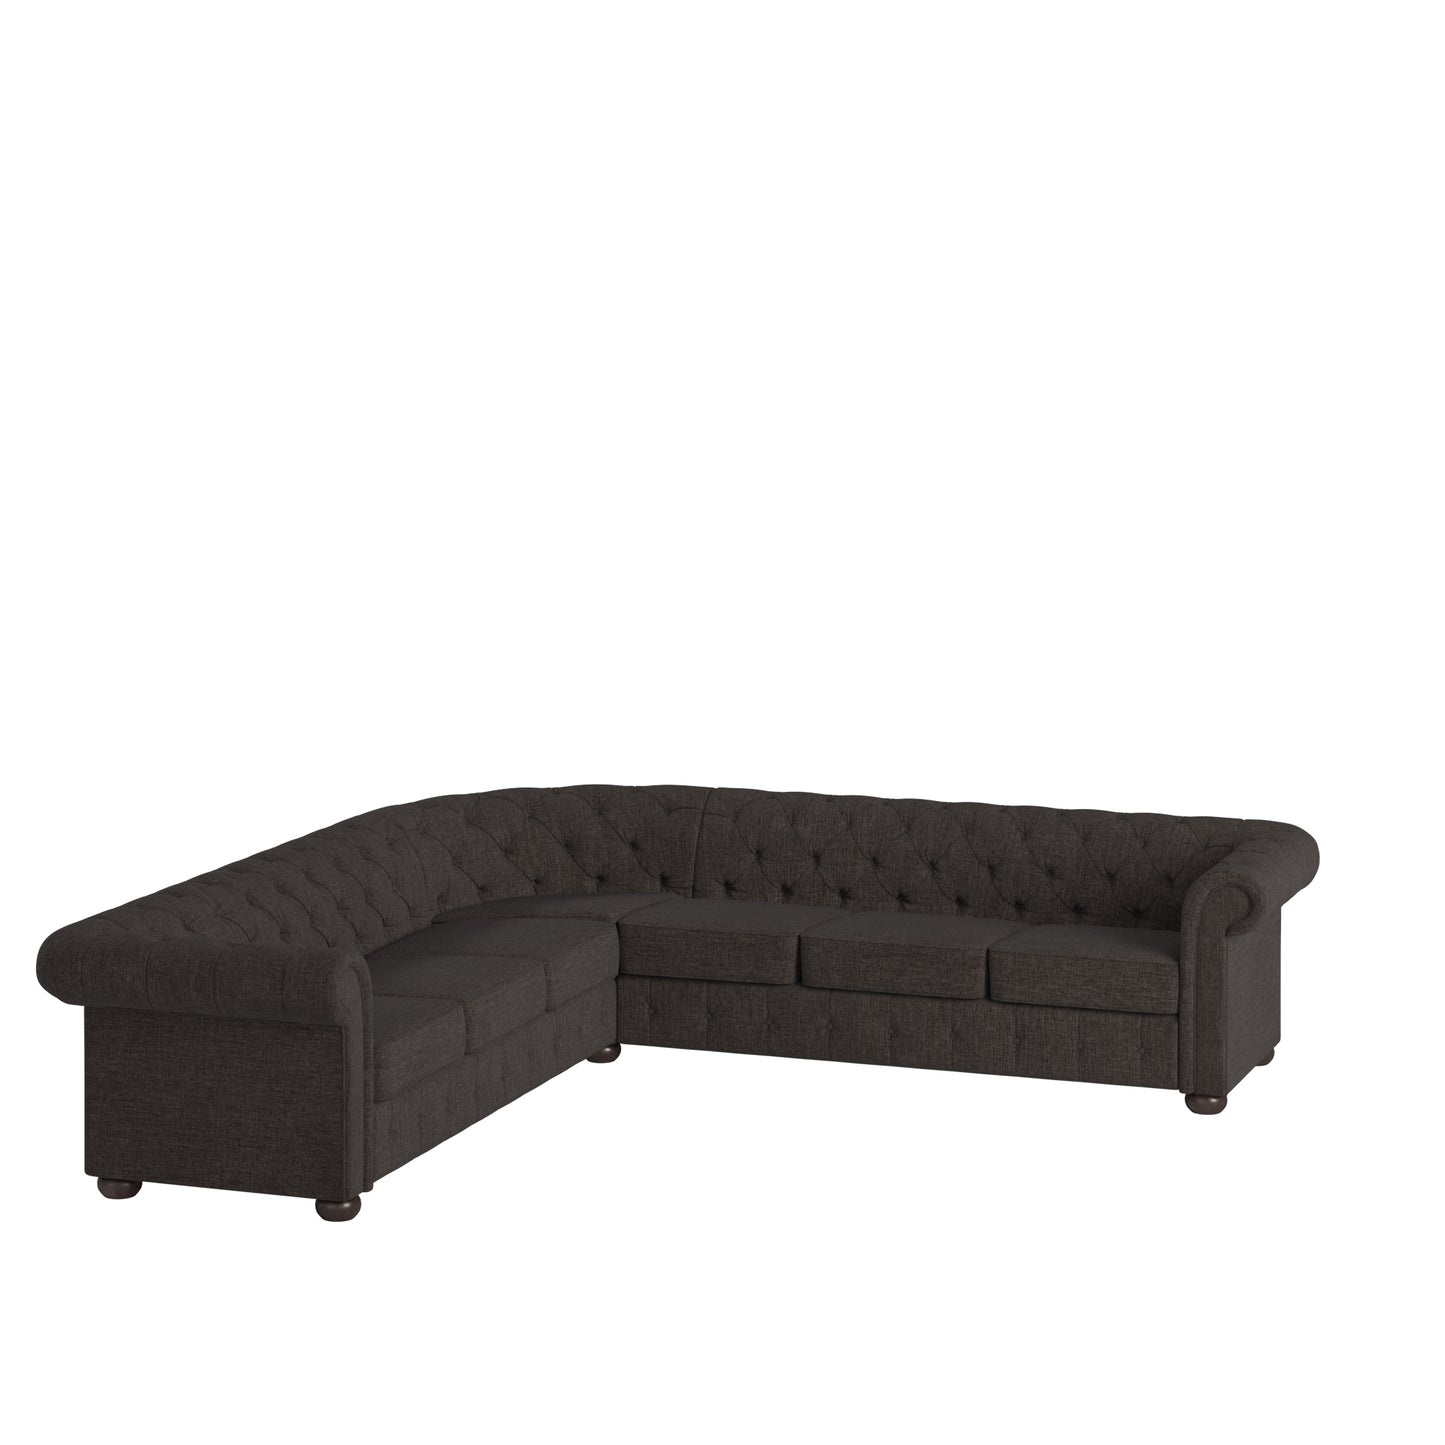 7-Seat L-Shaped Chesterfield Sectional Sofa - Dark Grey Linen